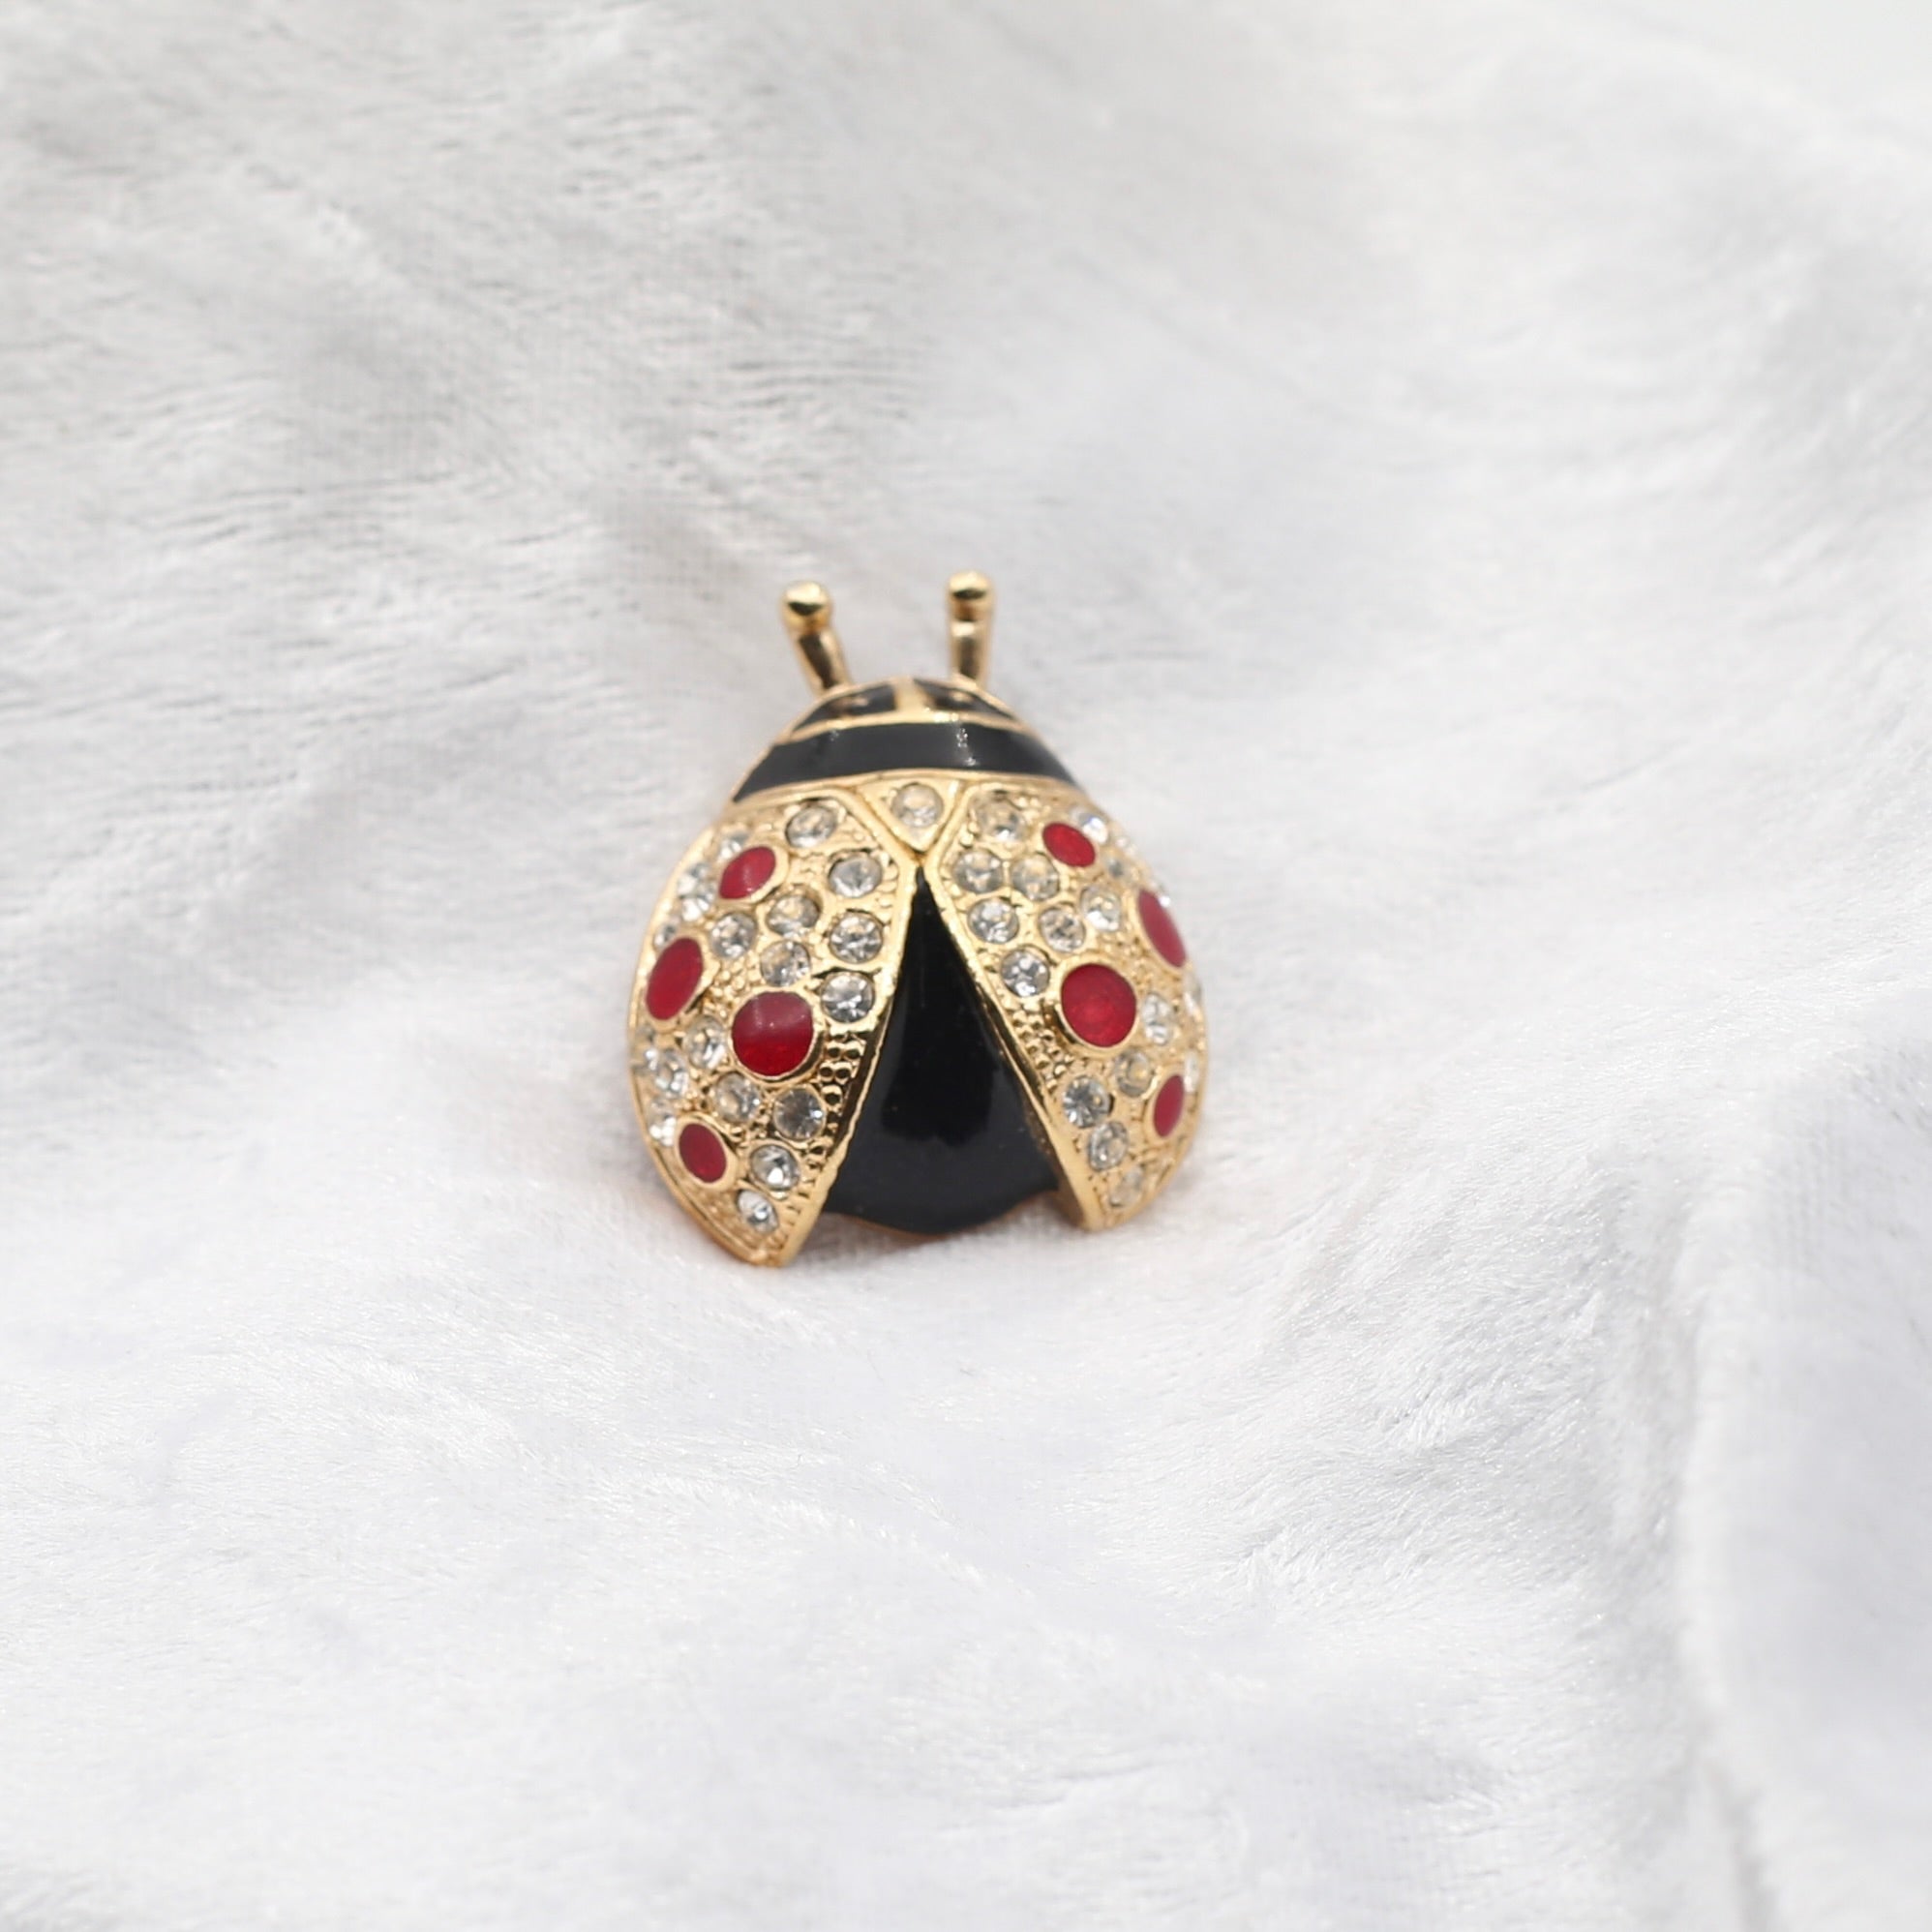 Cubic Zirconia with Red Stone Ladybug Brooch